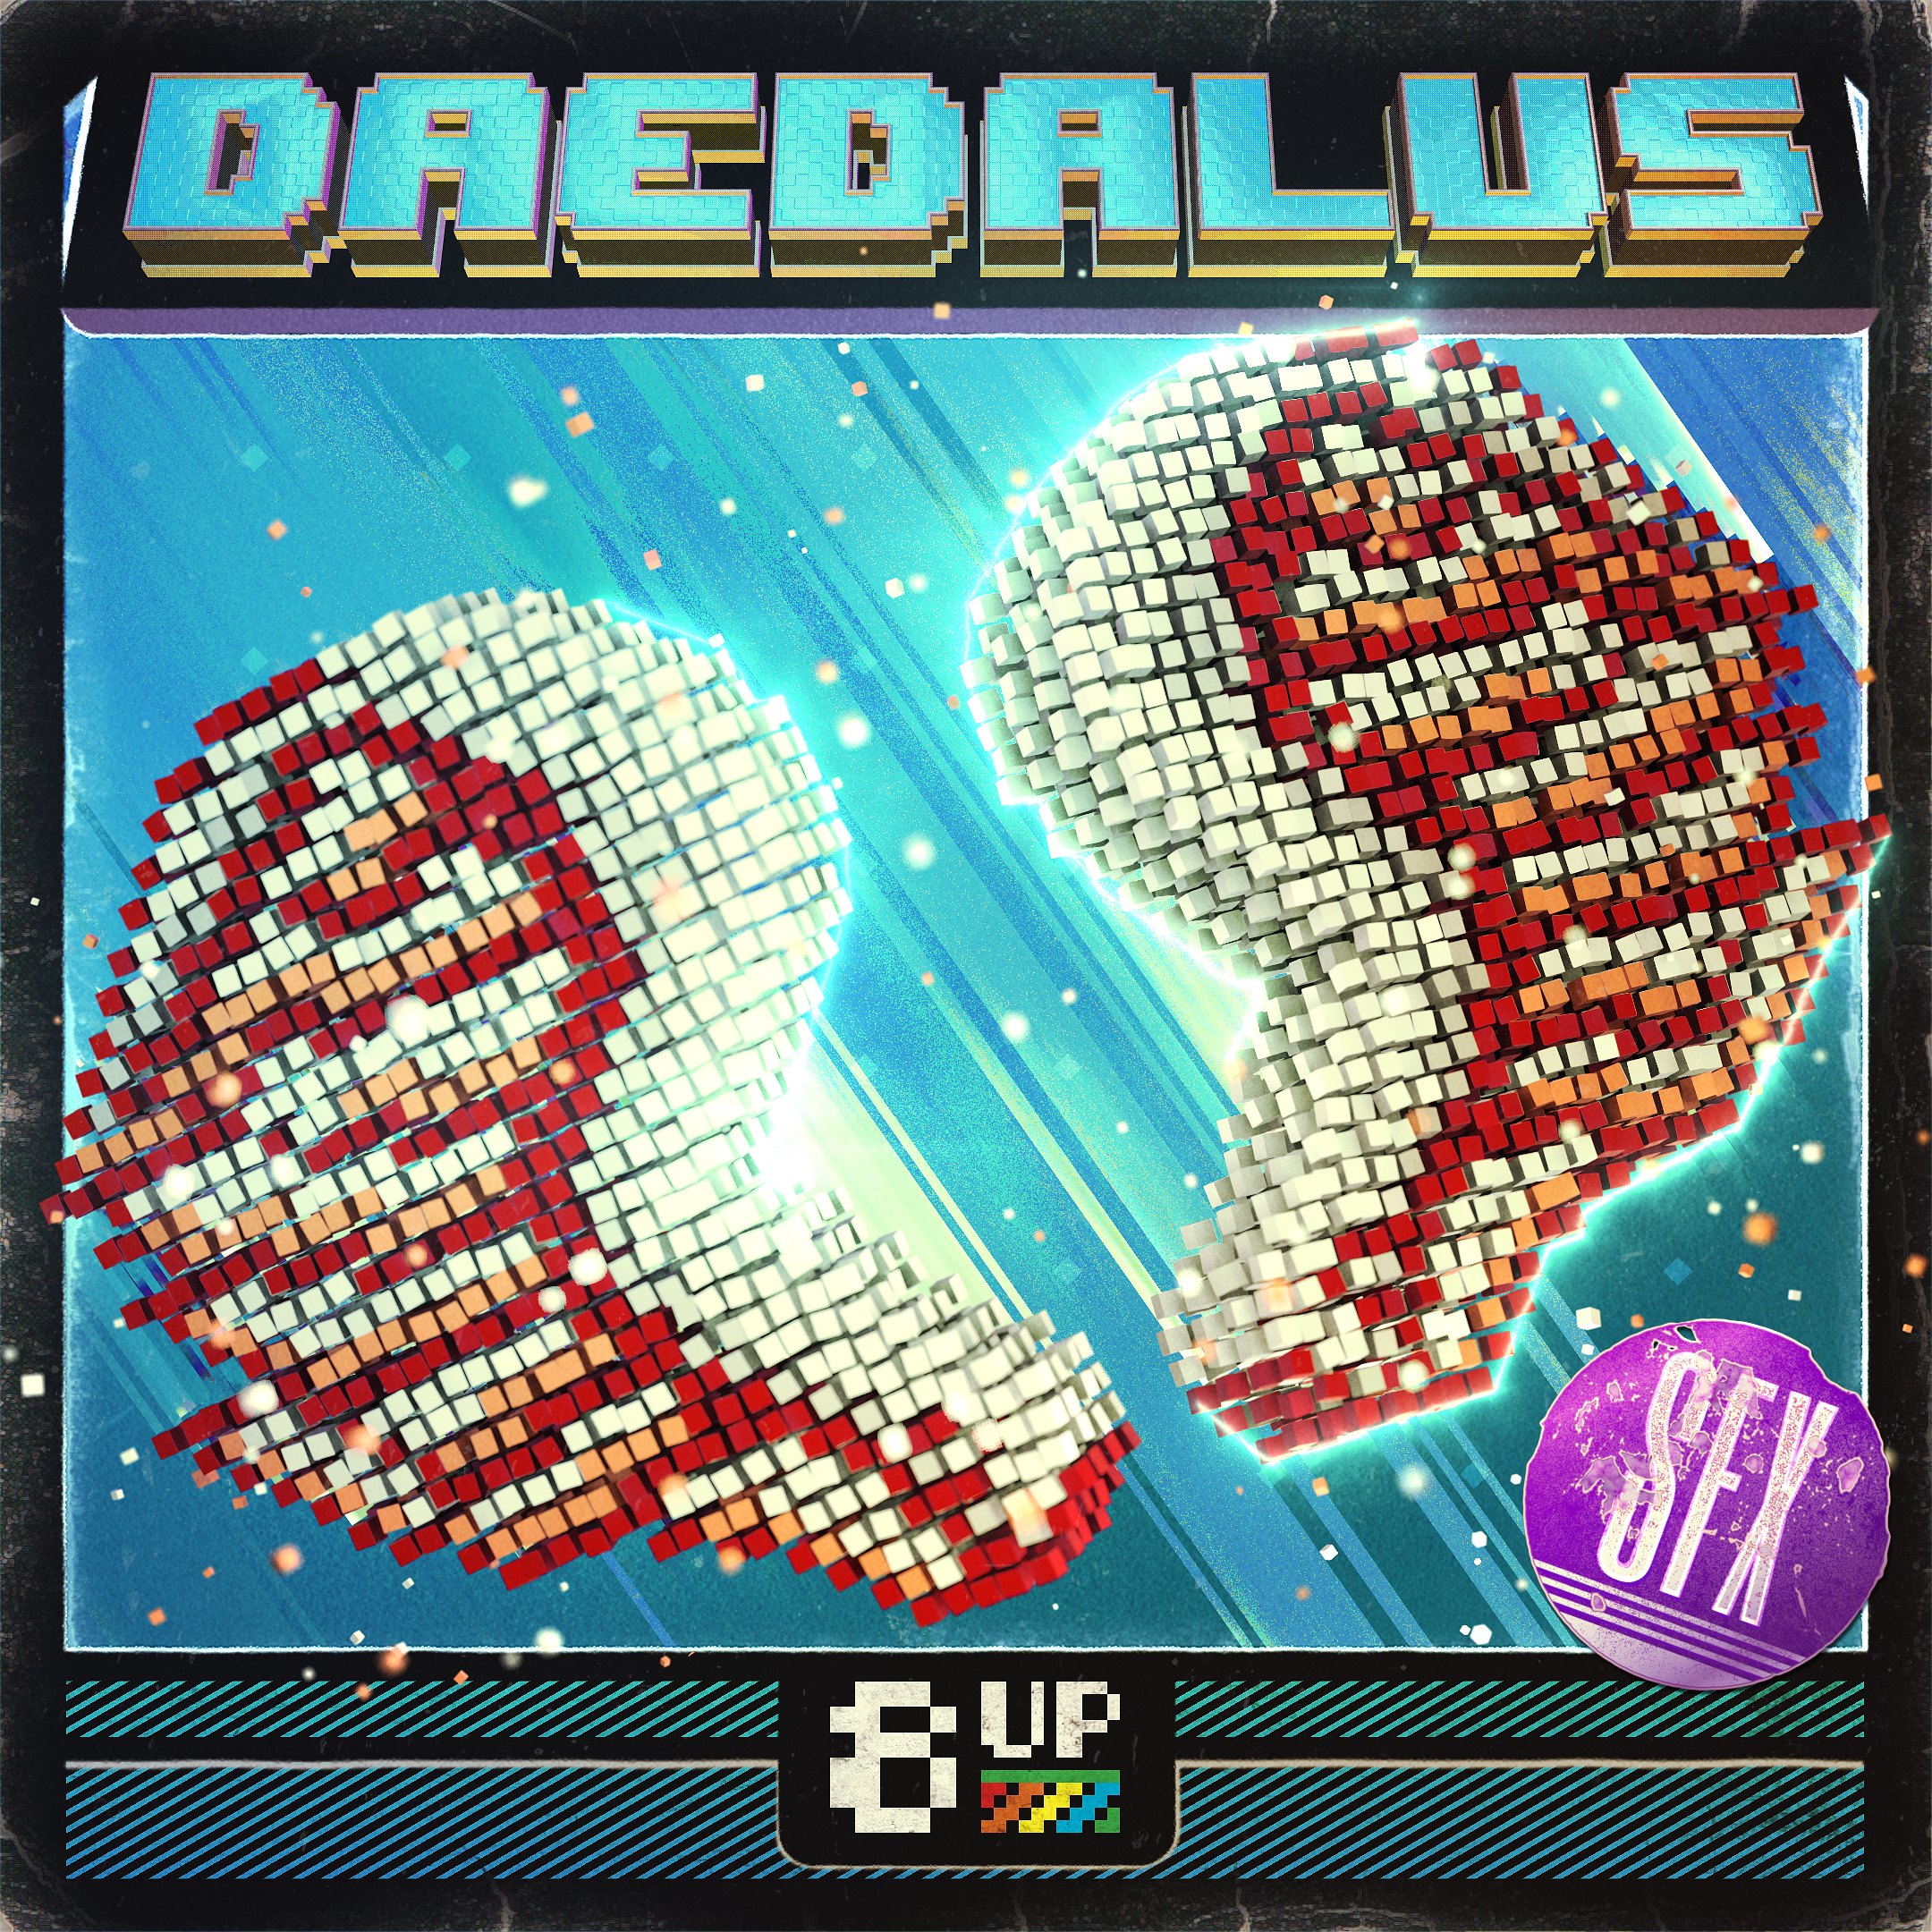 Daedalus Sound Effects Packshot by 8UP